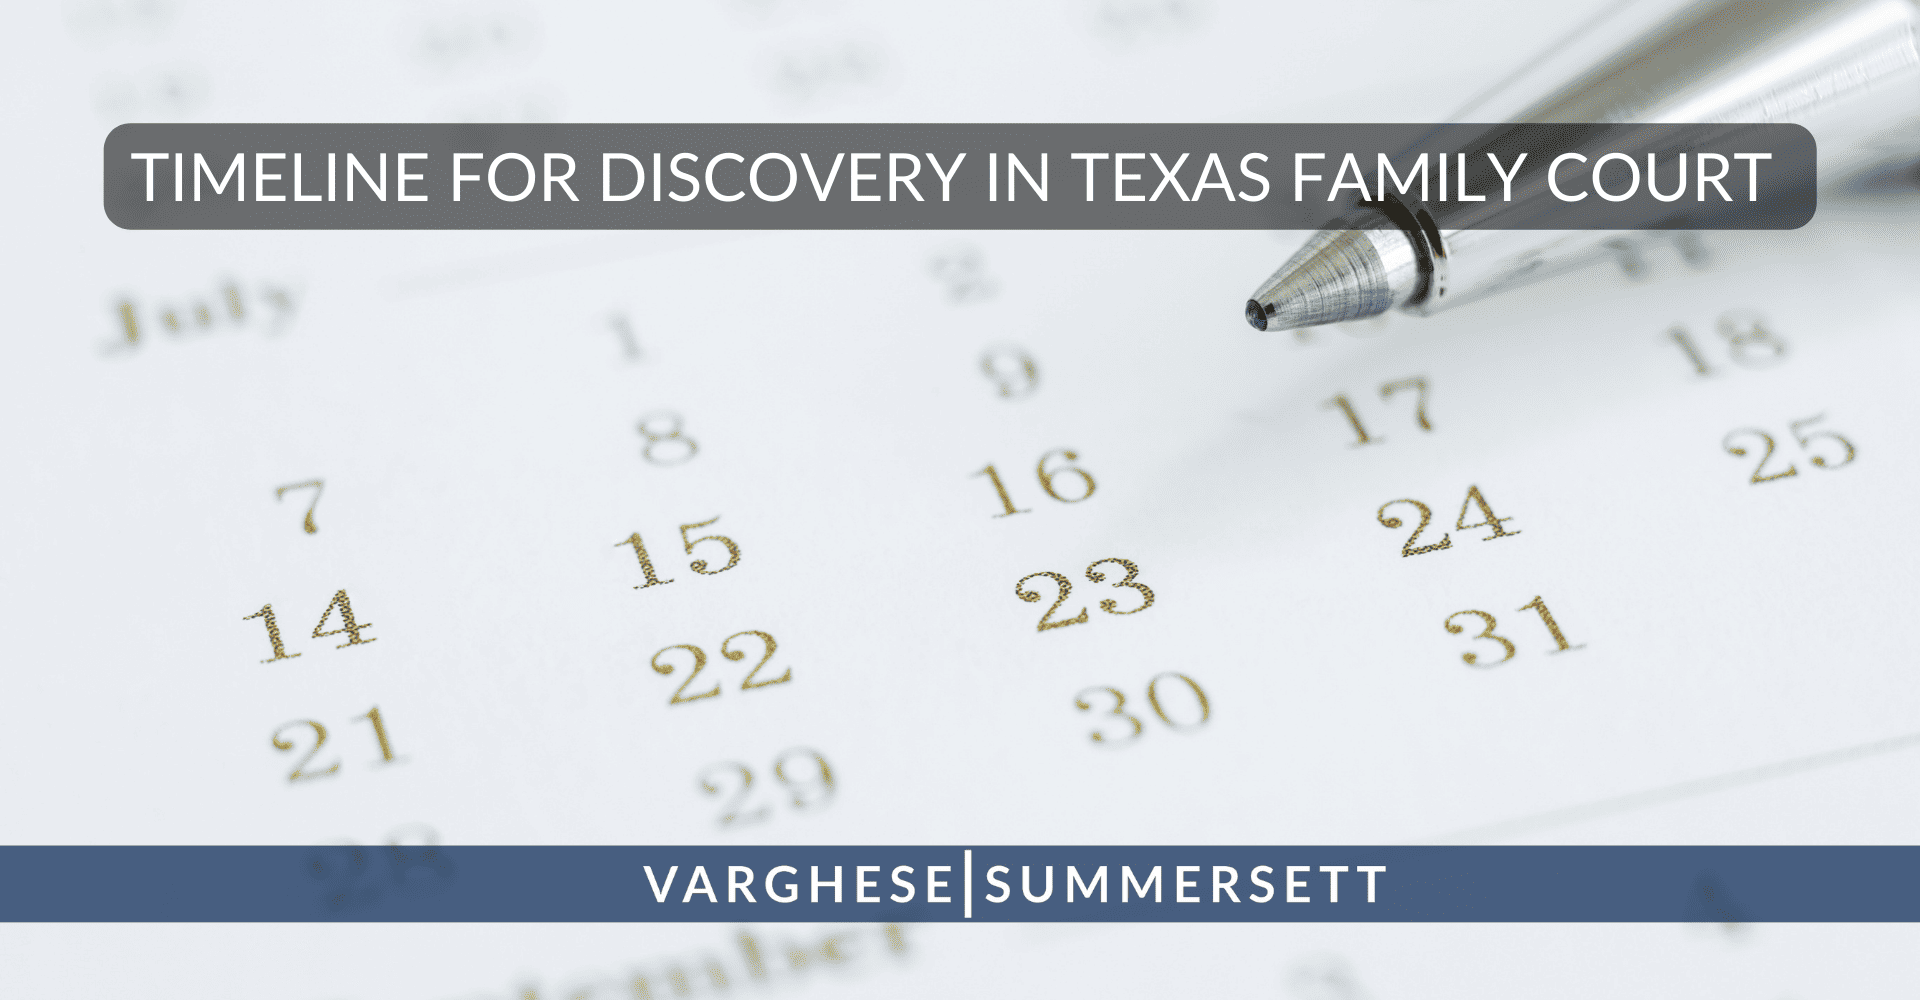 Timeline for discovery in Texas family court